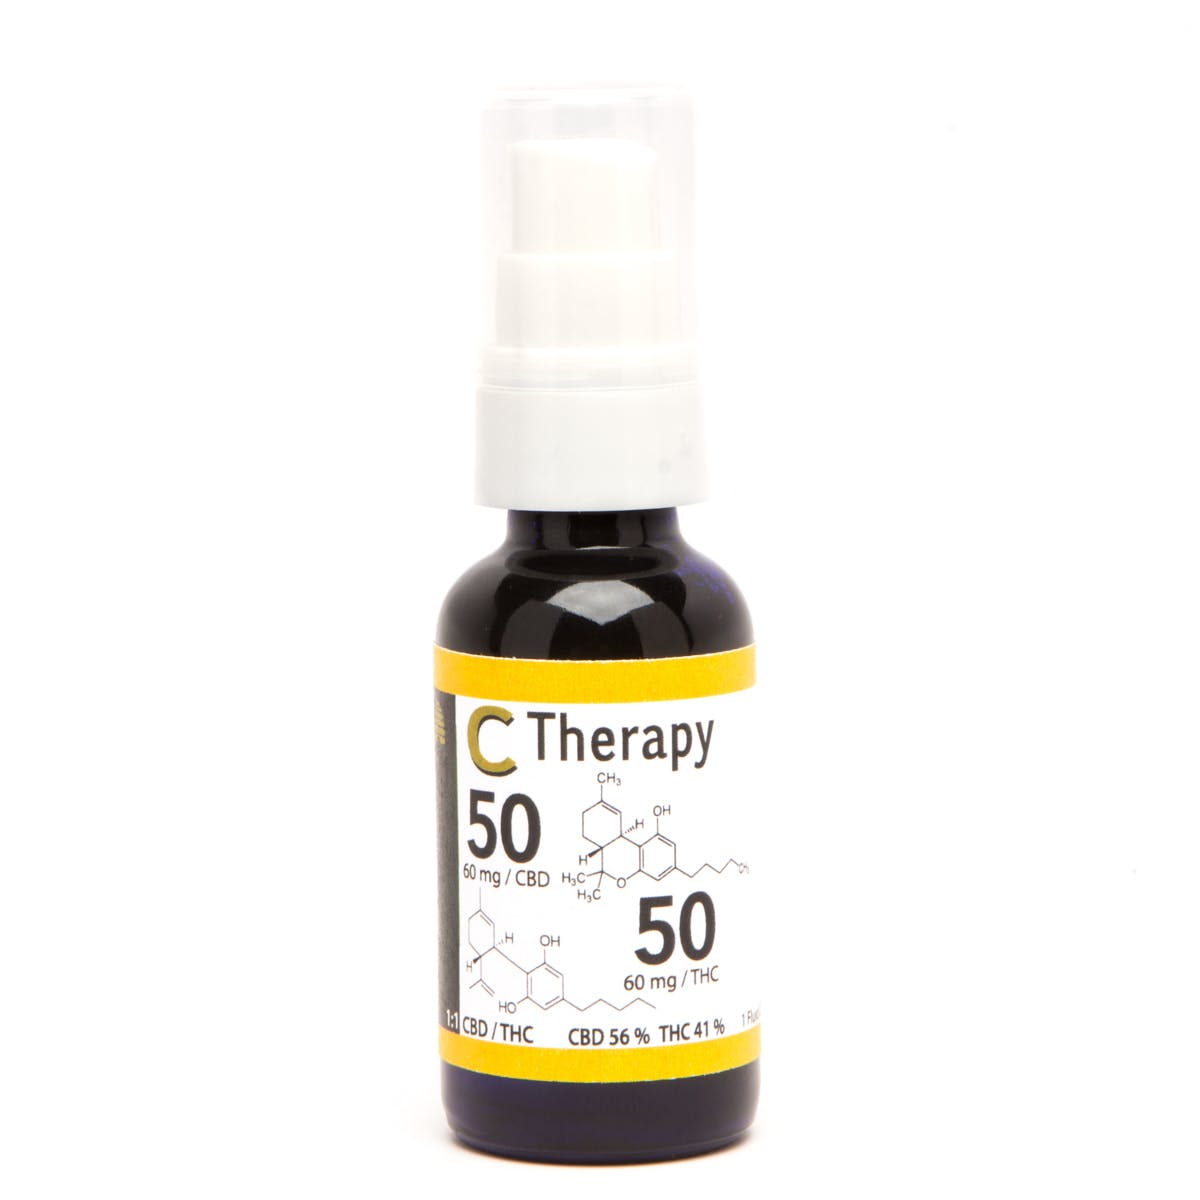 C Therapy 50/50